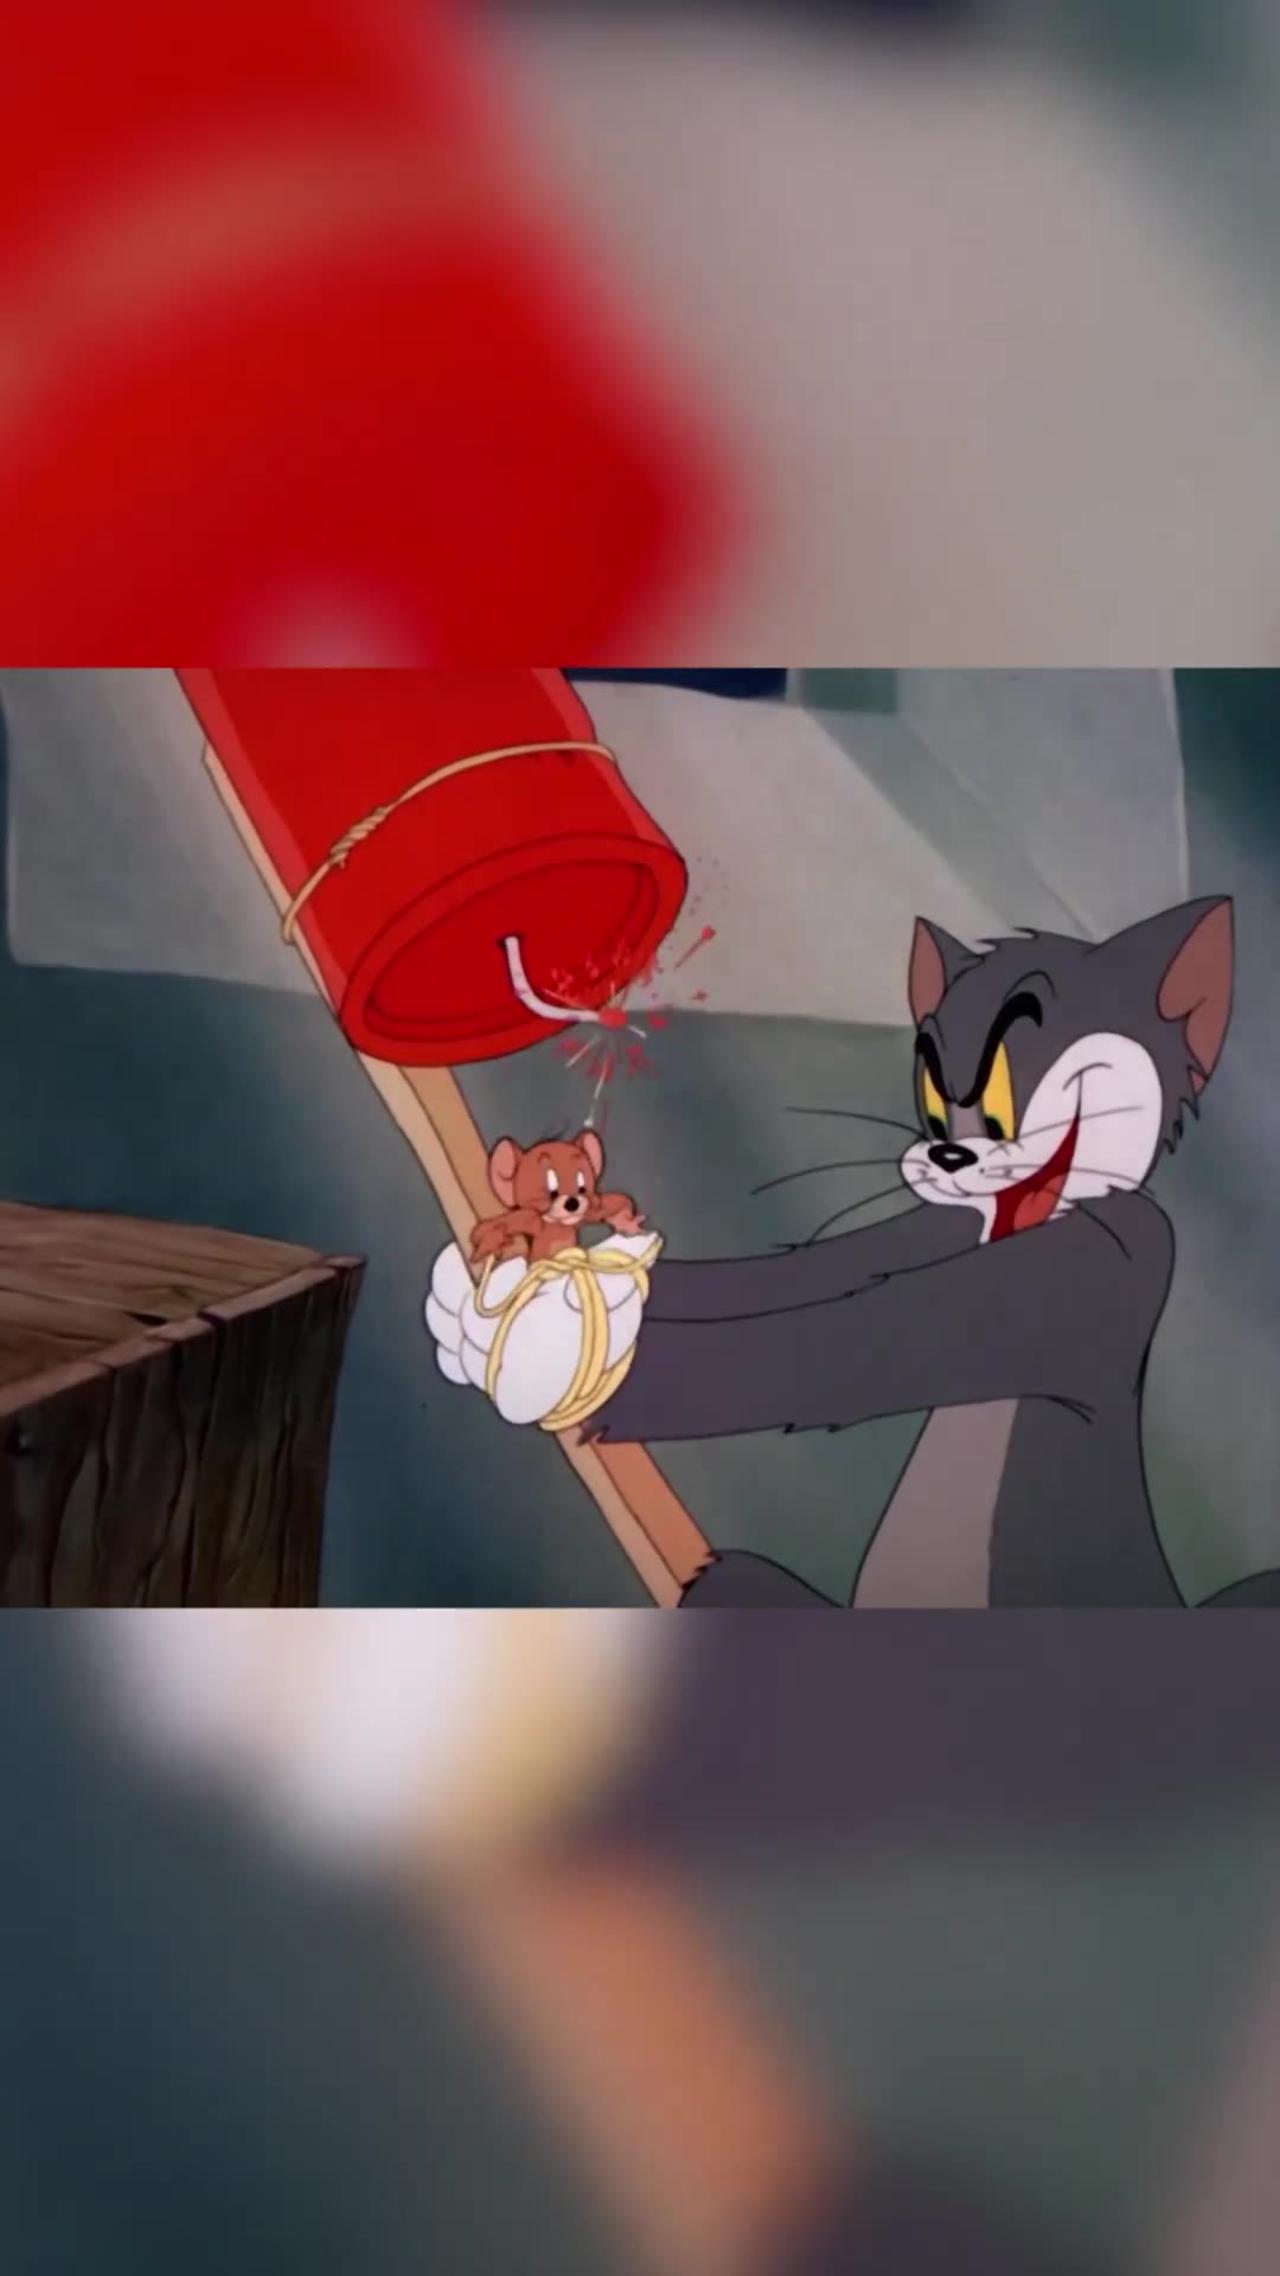 Tom and Jerry new video 😂😂 #shortvideo #viral #shorts #cartoonnetworkcartoons #cartooncharacters